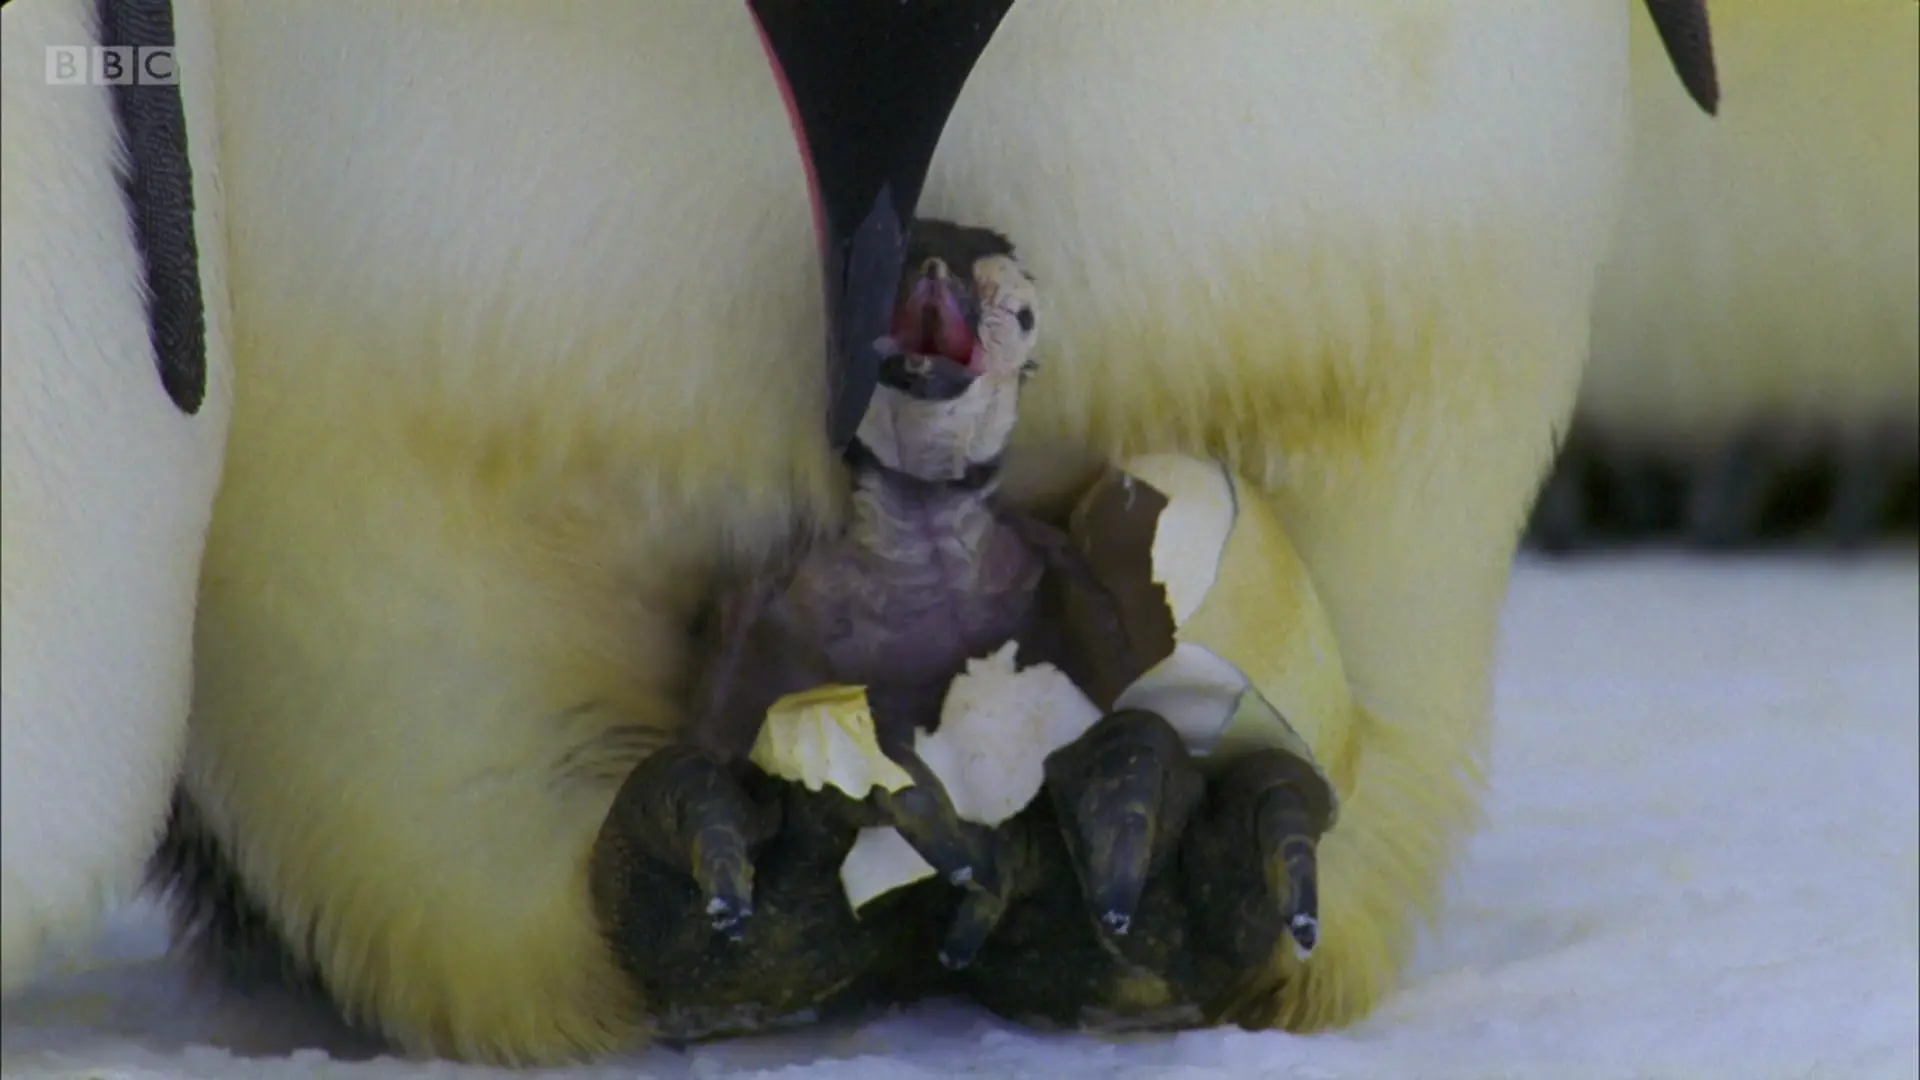 Emperor penguin (Aptenodytes forsteri) as shown in Planet Earth - From Pole to Pole